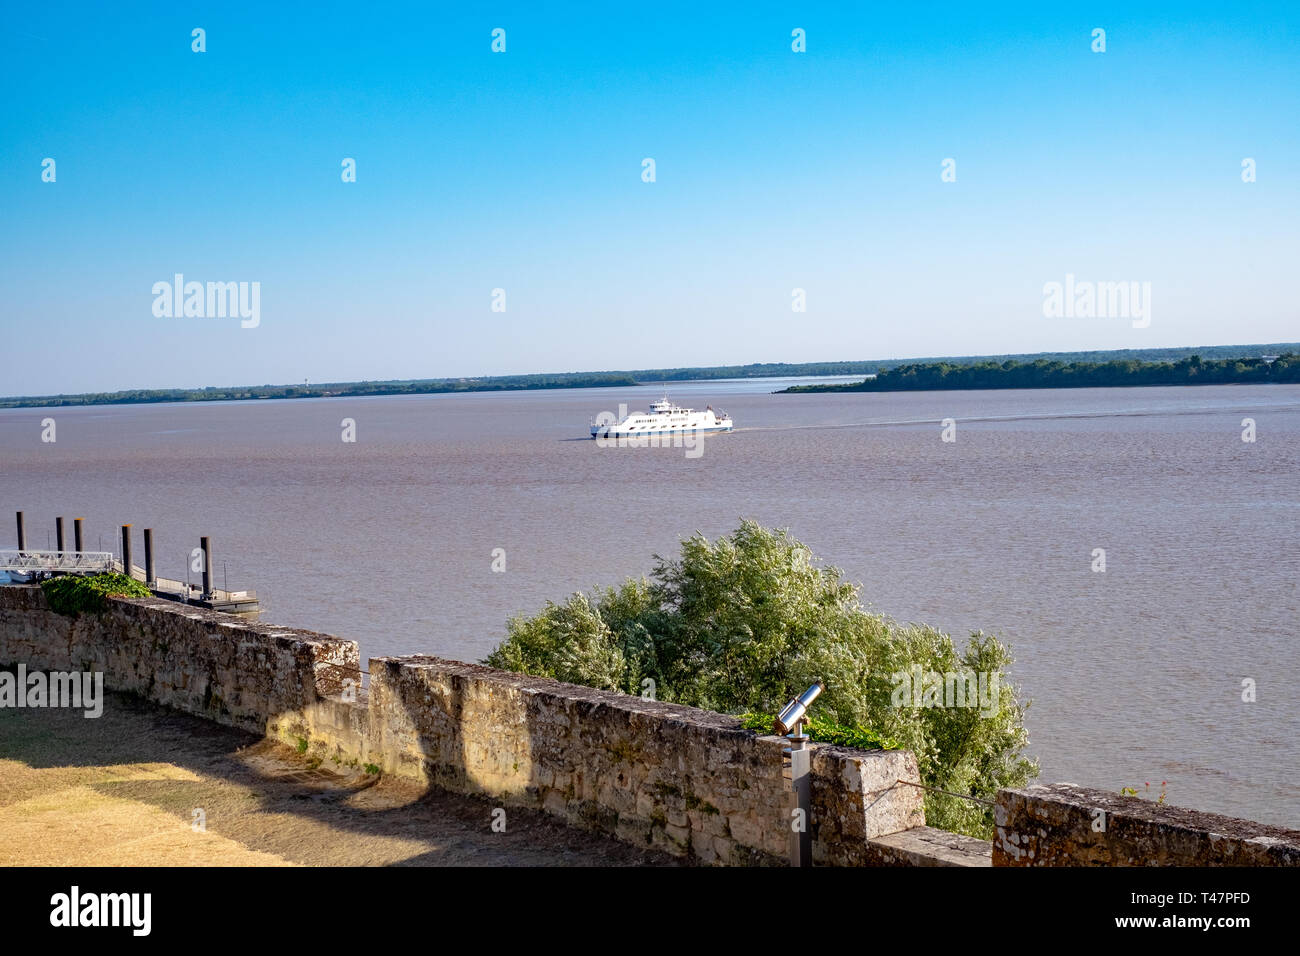 A boat is visible from the promenade at Blay, France Stock Photo